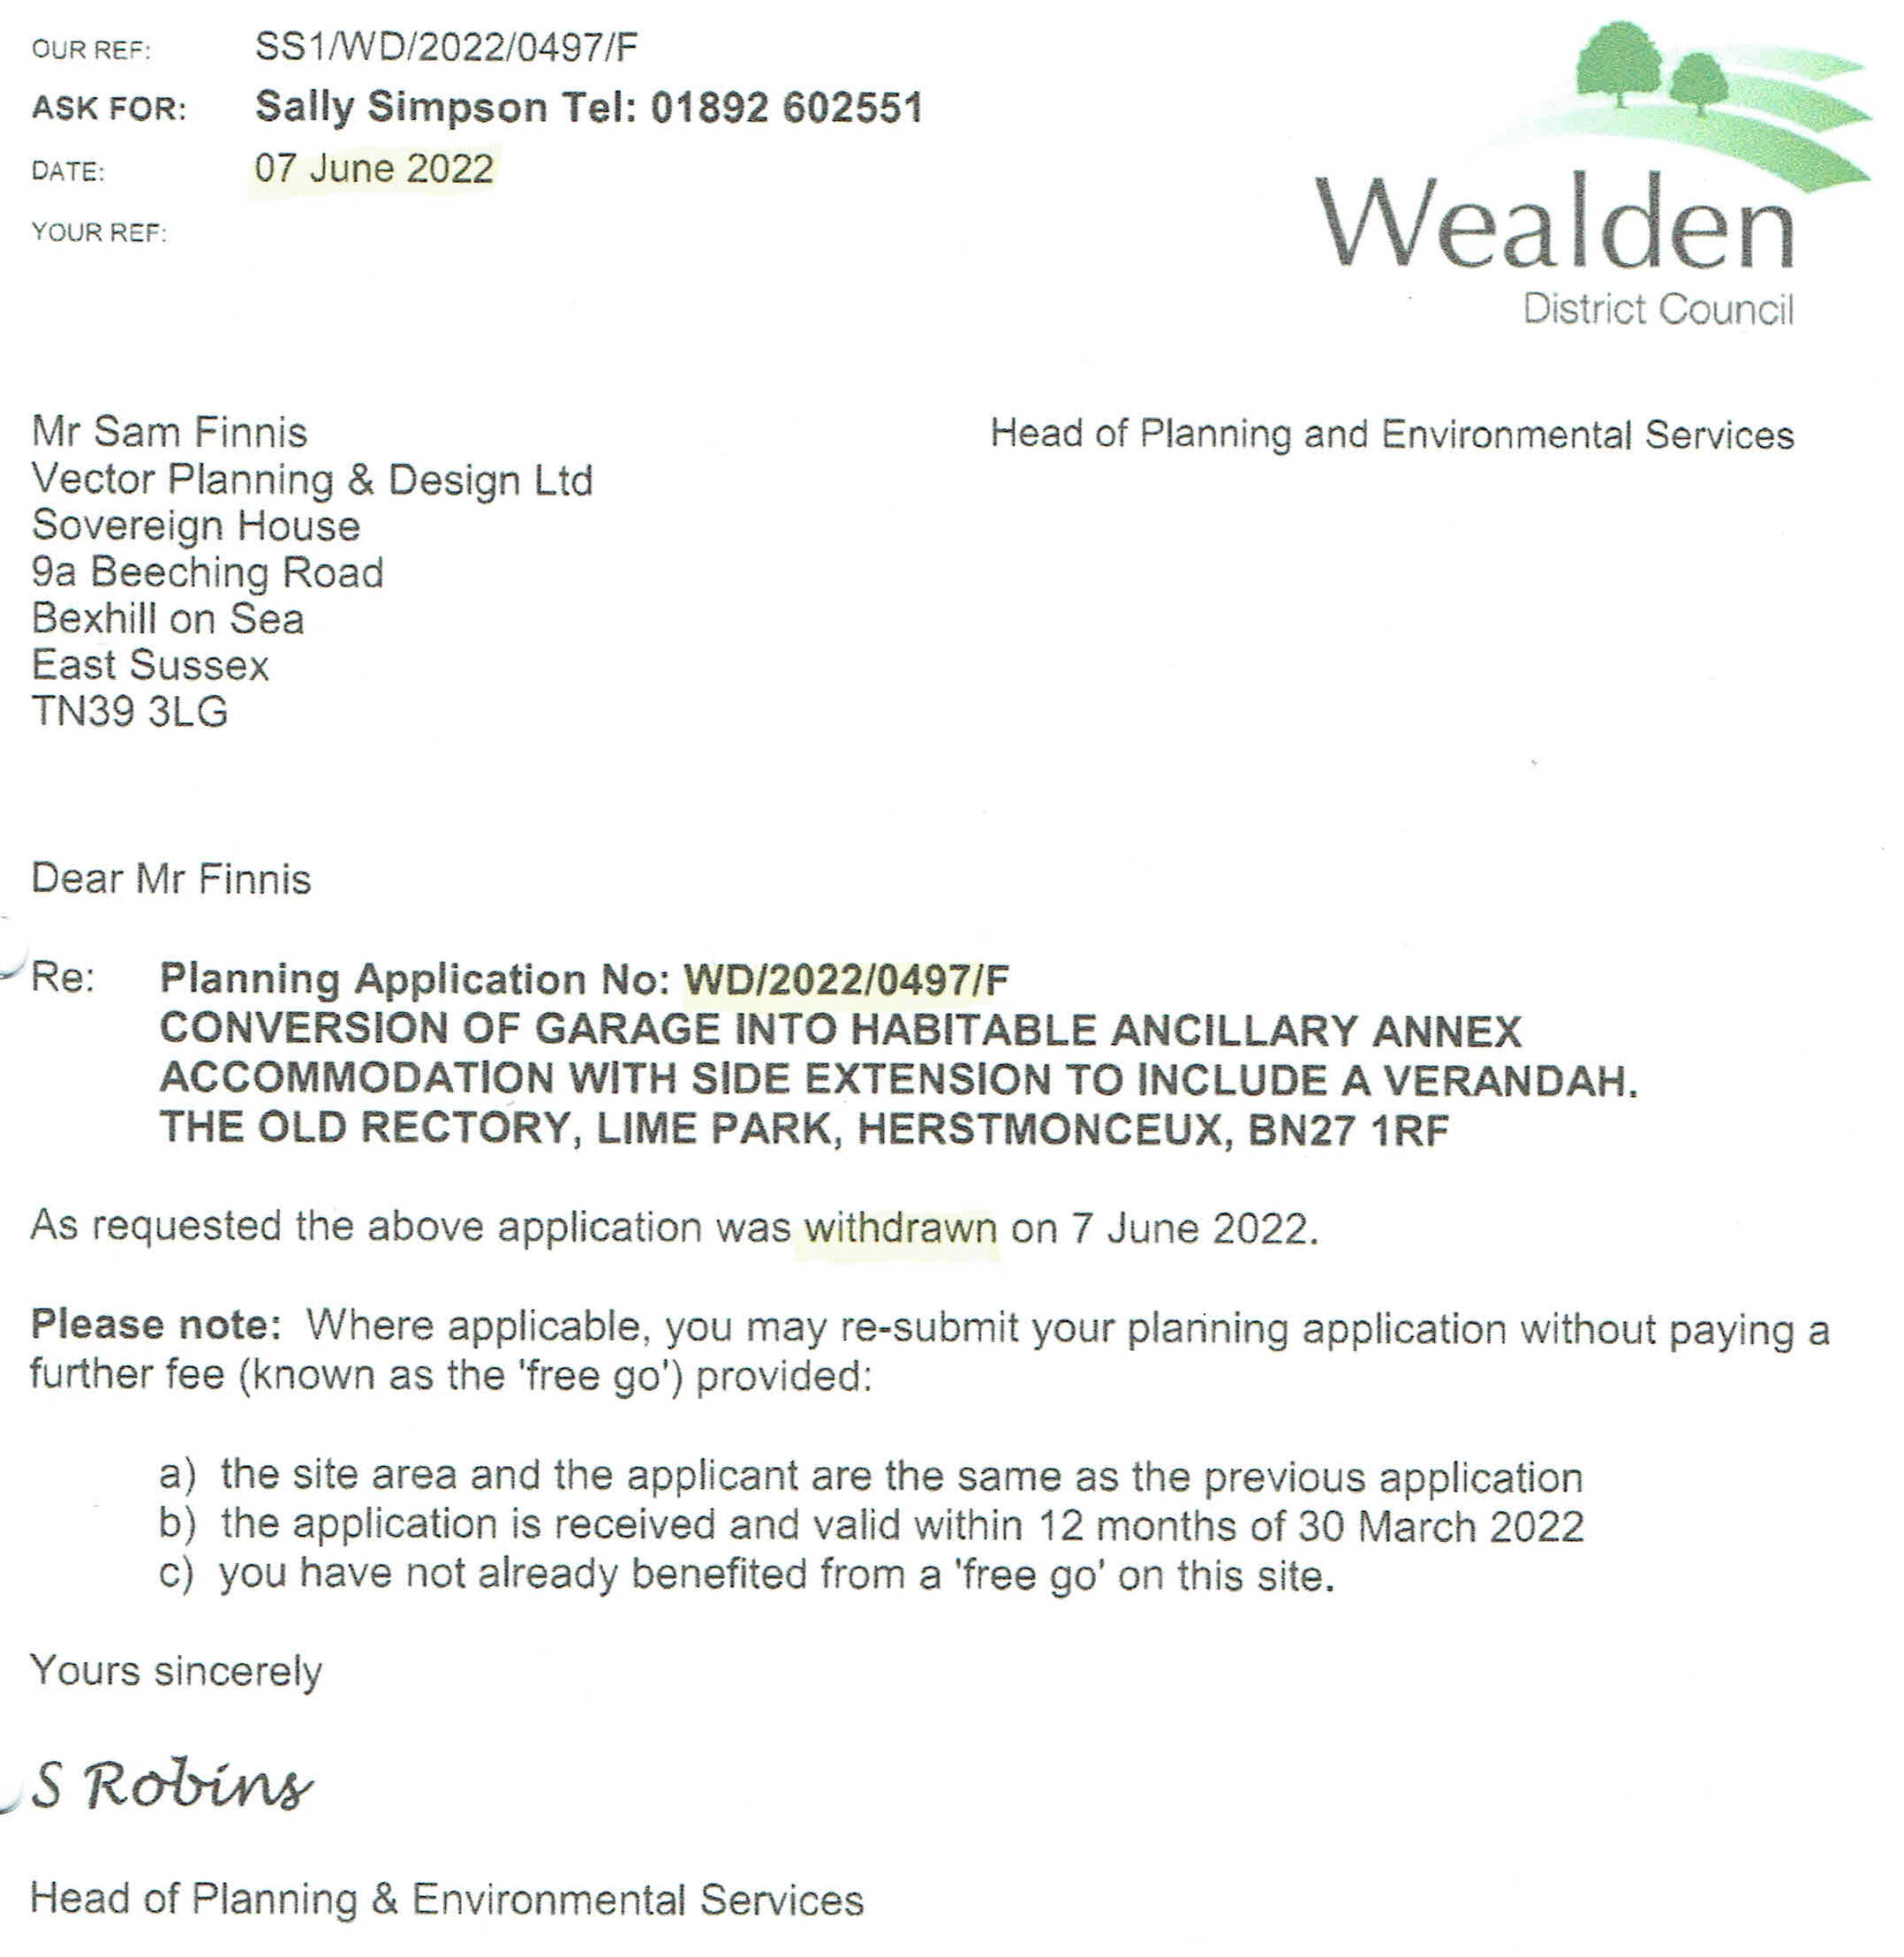 Withdrawn planning application WD 2022 July 0497